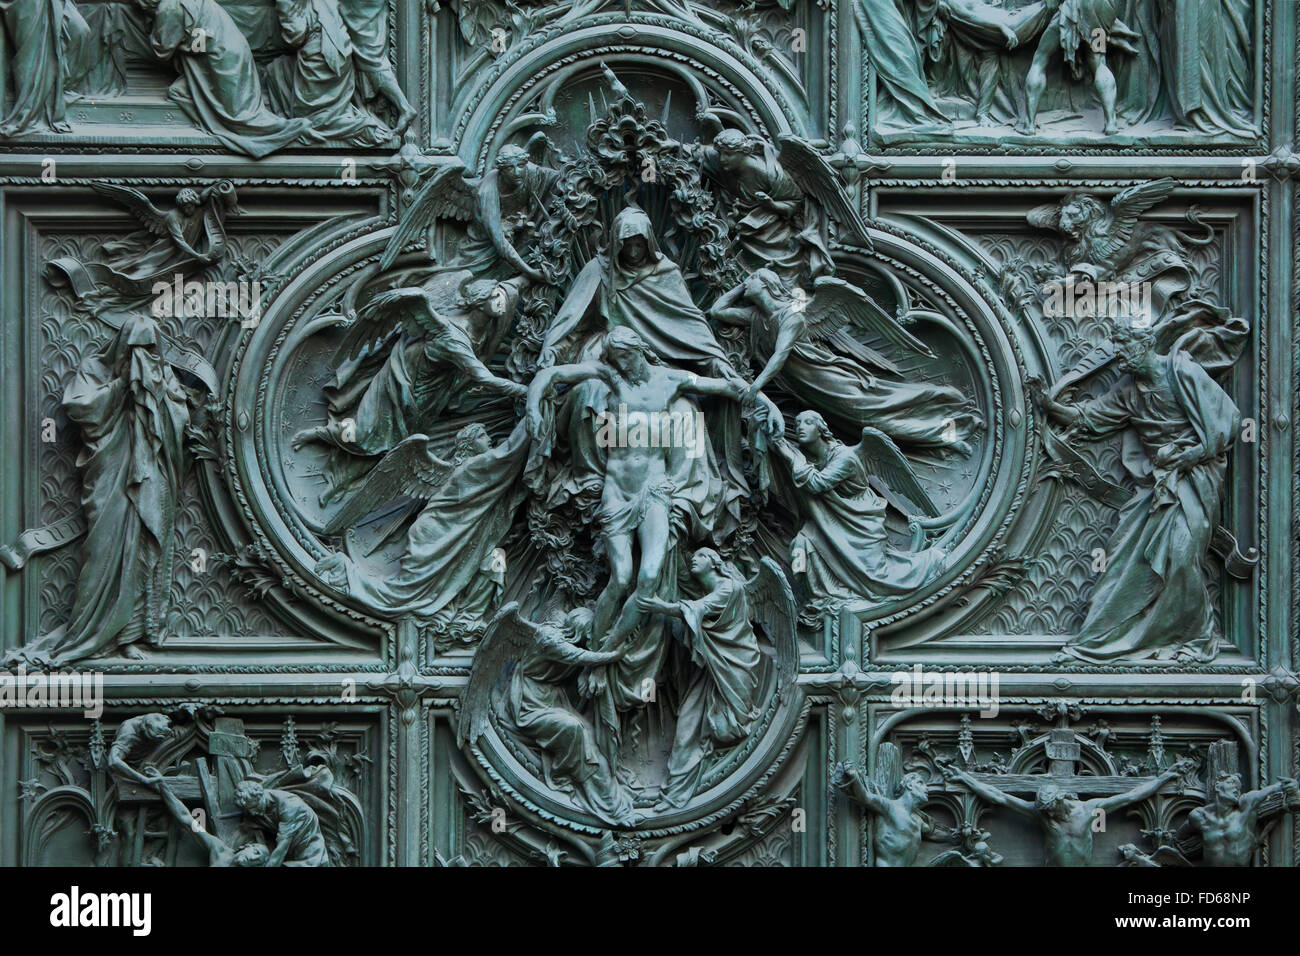 Ascension of Jesus. Detail of the main bronze door of the Milan Cathedral (Duomo di Milano) in Milan, Italy. Evangelists Saint Matthew and Saint Mark are depicted on each side. The bronze door was designed by Italian sculptor Ludovico Pogliaghi in 1894-1908. Stock Photo